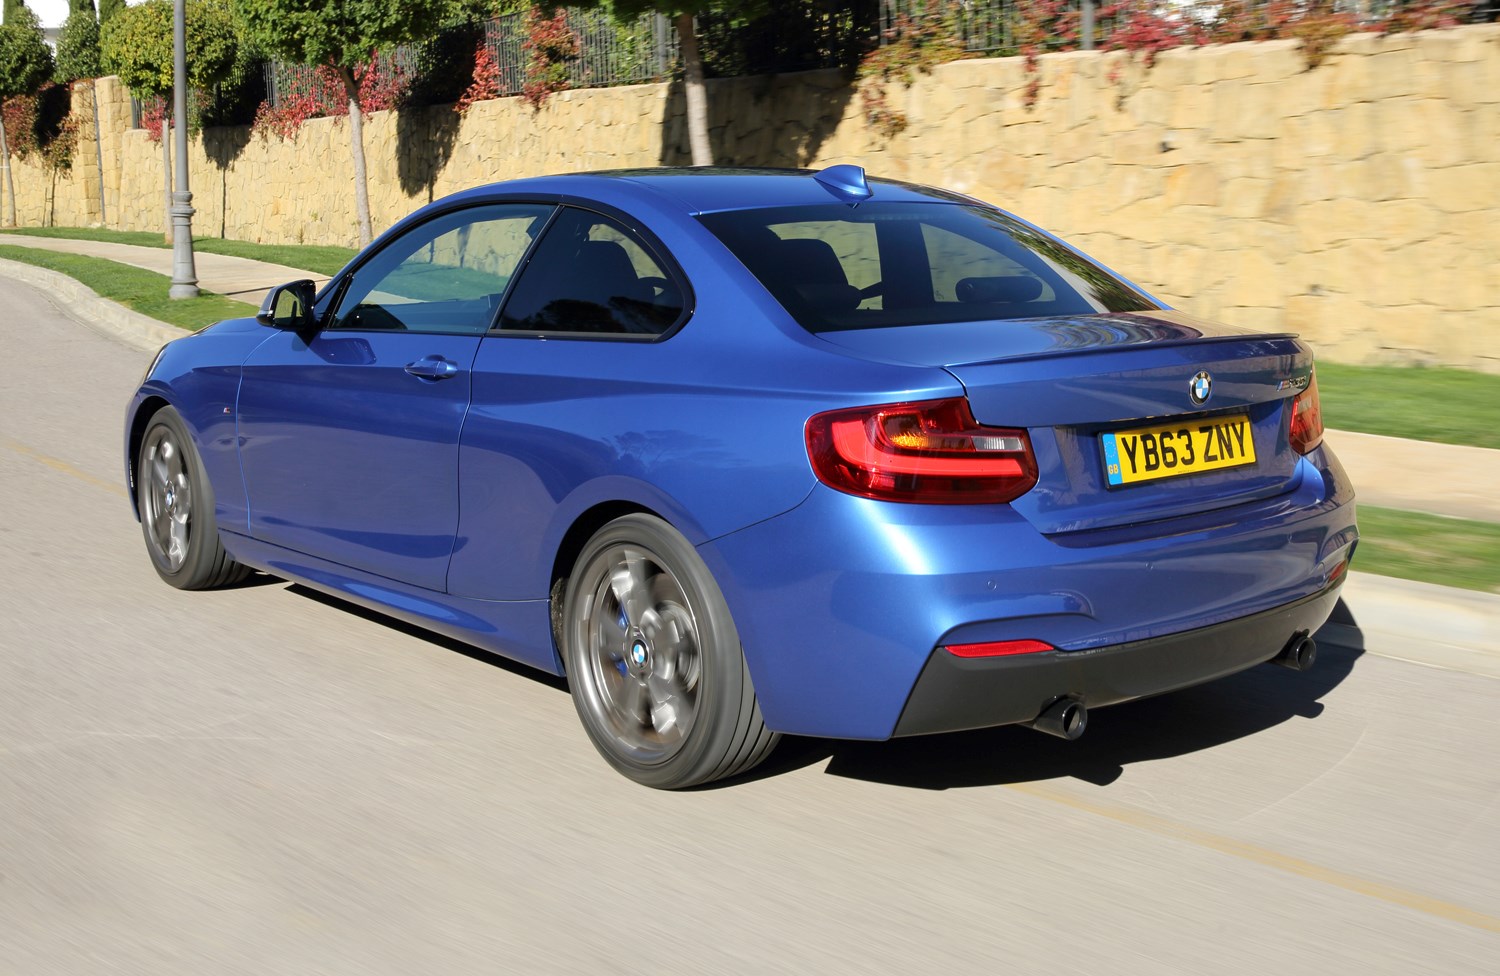 BMW 2-Series Coupe (2014 - ) Photos | Parkers